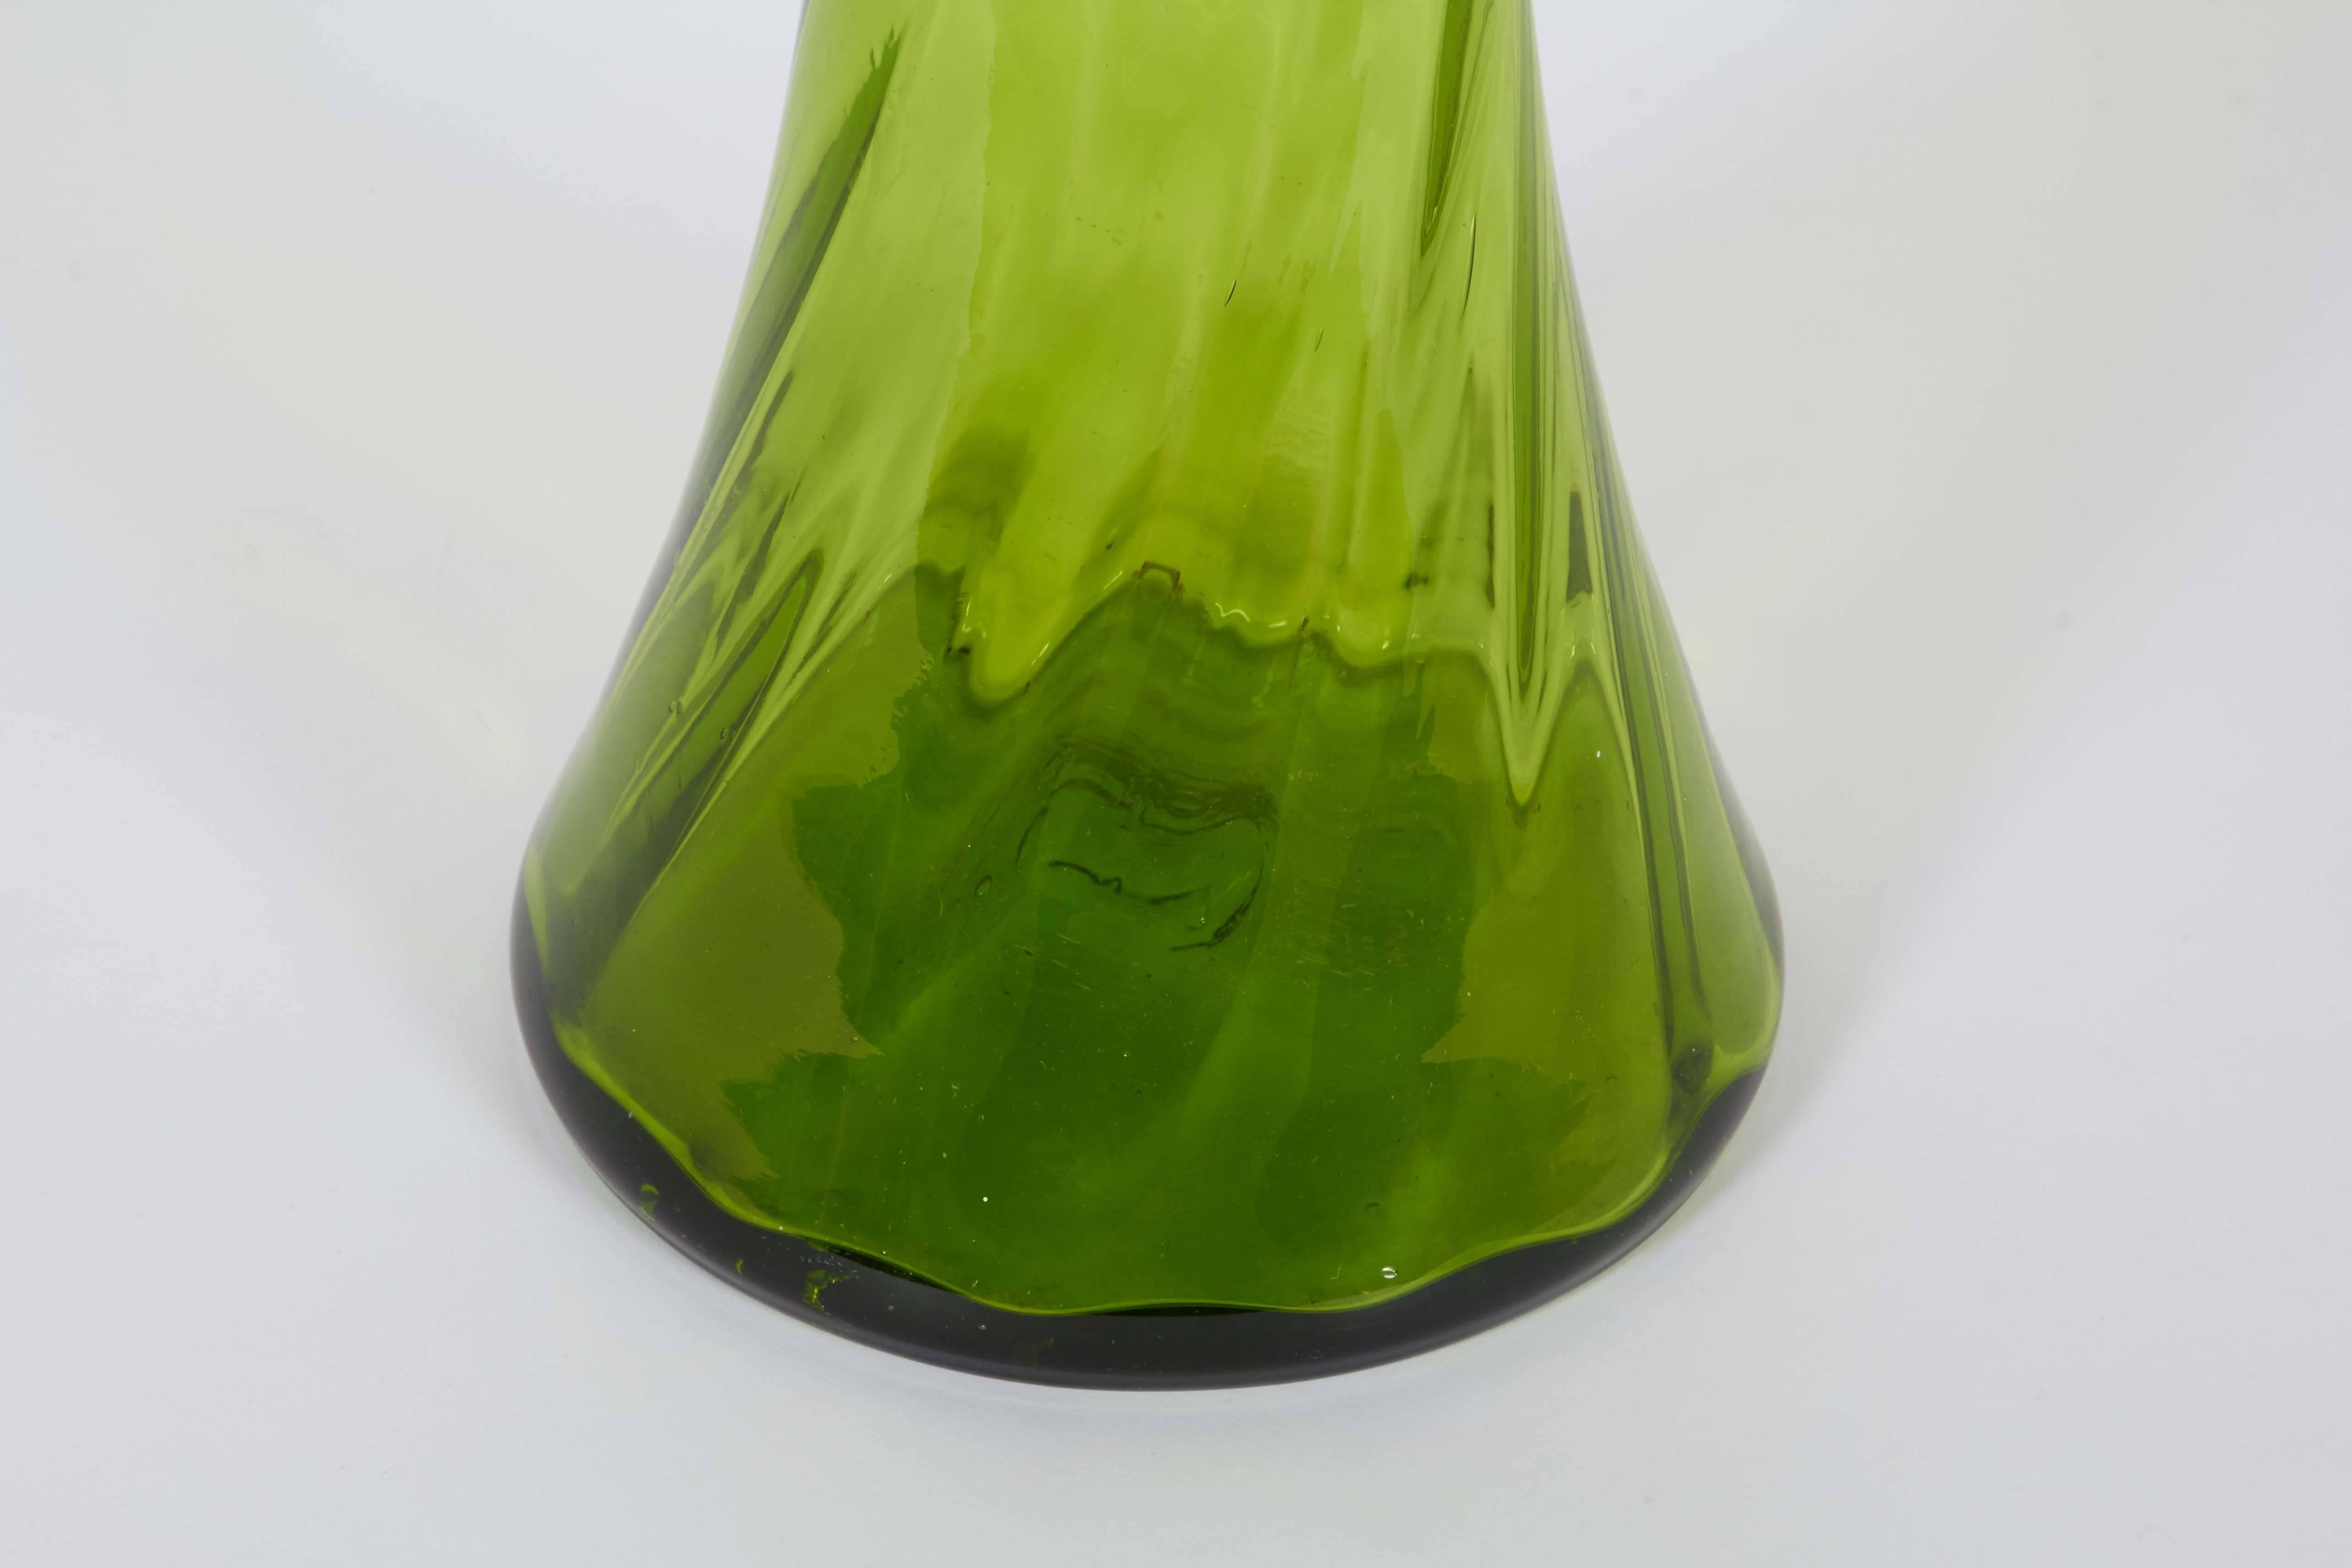 A circa 1960s blown glass floor vase in bright green by Blenko Glass of Milton, West Virginia, of waisted form with rippled detail. Very good vintage condition, any presence of wear consistent with age and use.

10989